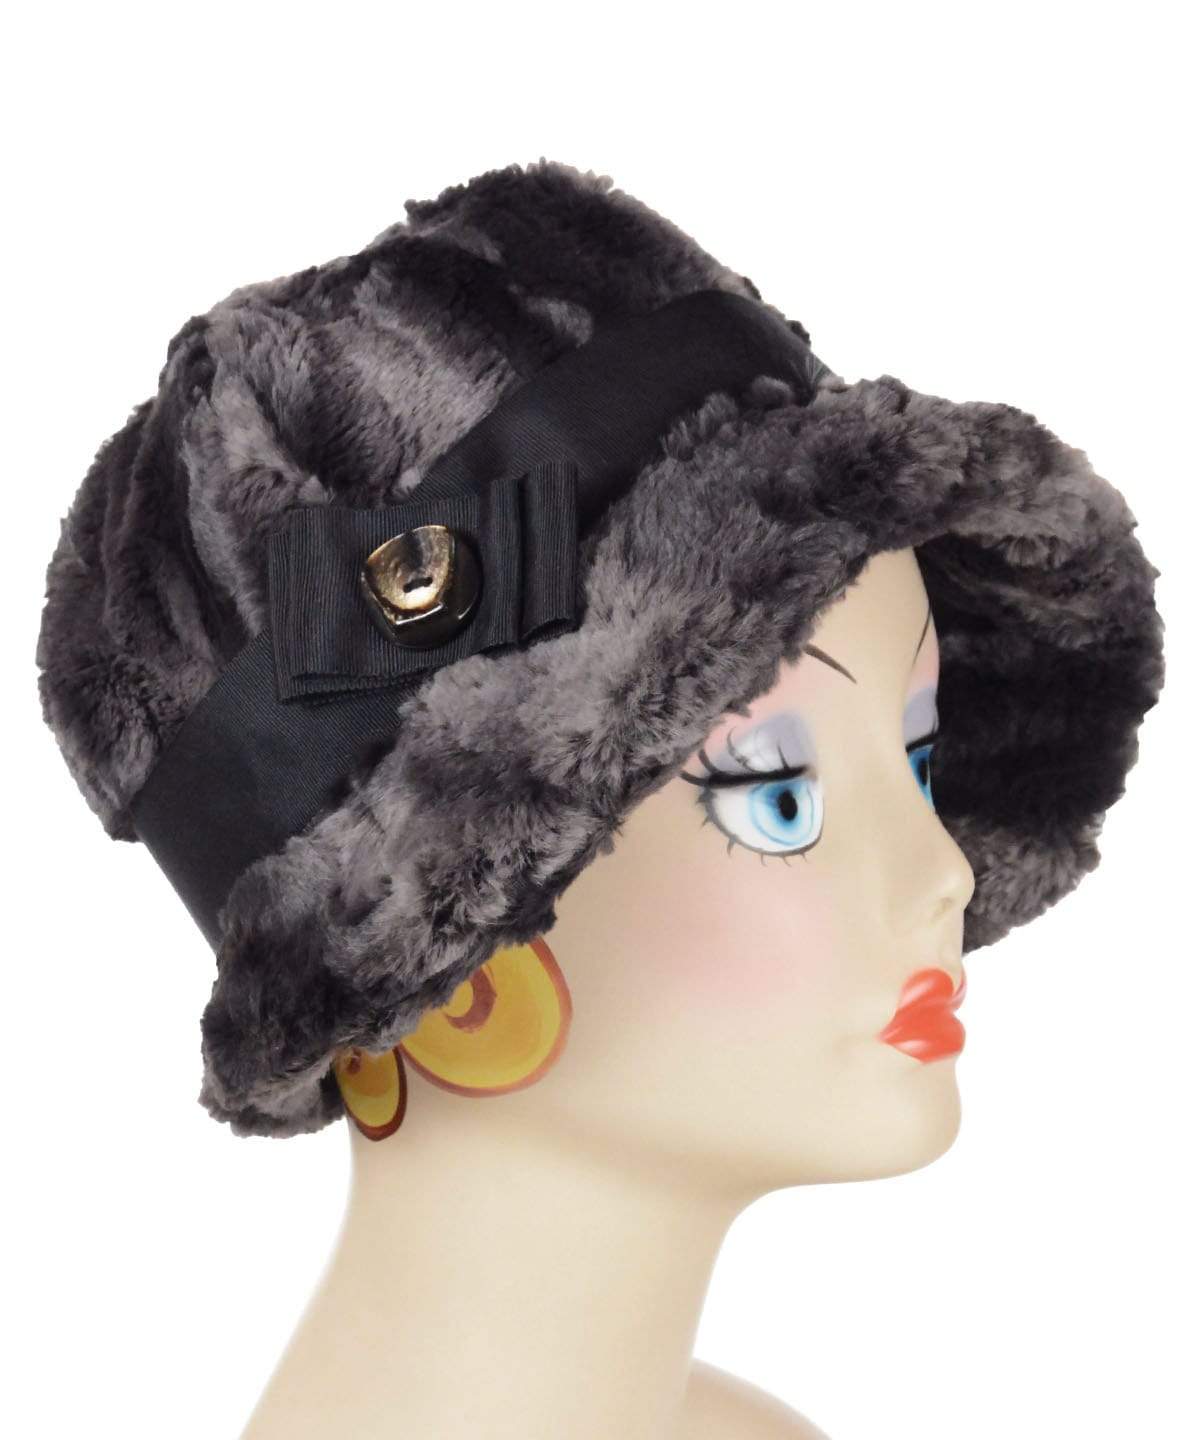  Sideview of Grace Cloche Style 1920s Hat in Luxury Faux Fur in Espresso Bean Faux Fur with  Black Grosgrain Bow and Band featuring Mult-Color Brown Button | By Pandemonium Millinery | Seattle WA USA